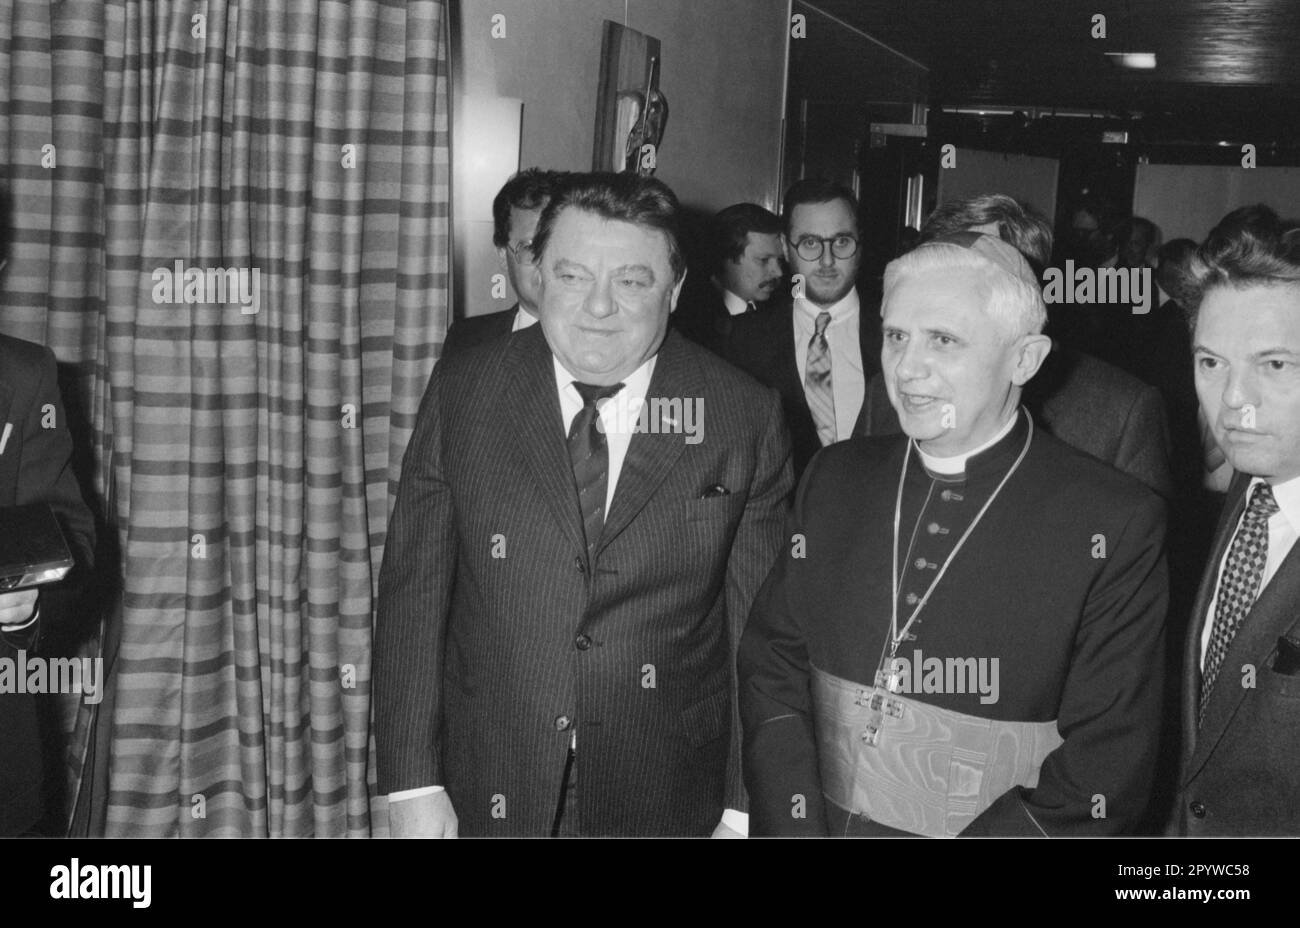 Franz Josef Strauß and Joseph Cardinal Ratzinger at the church New Year's reception in Munich. [automated translation] Stock Photo